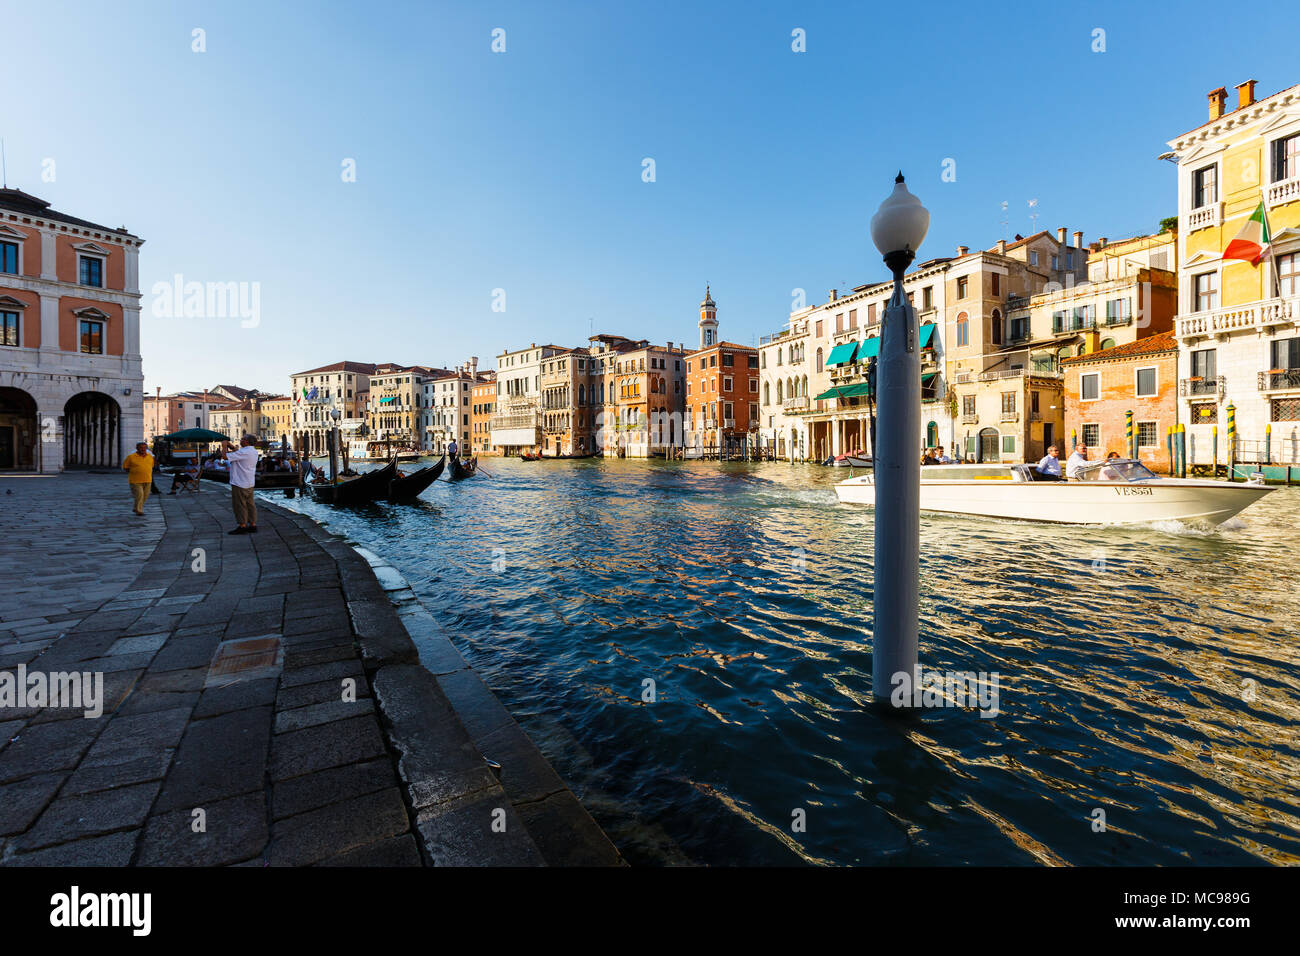 Venice, Italy - June, 21, 2013: Typical view to Venice city, to Grand canal, many tourists people enjoy a rest on gondolas and pleasure boat. Campanil Stock Photo